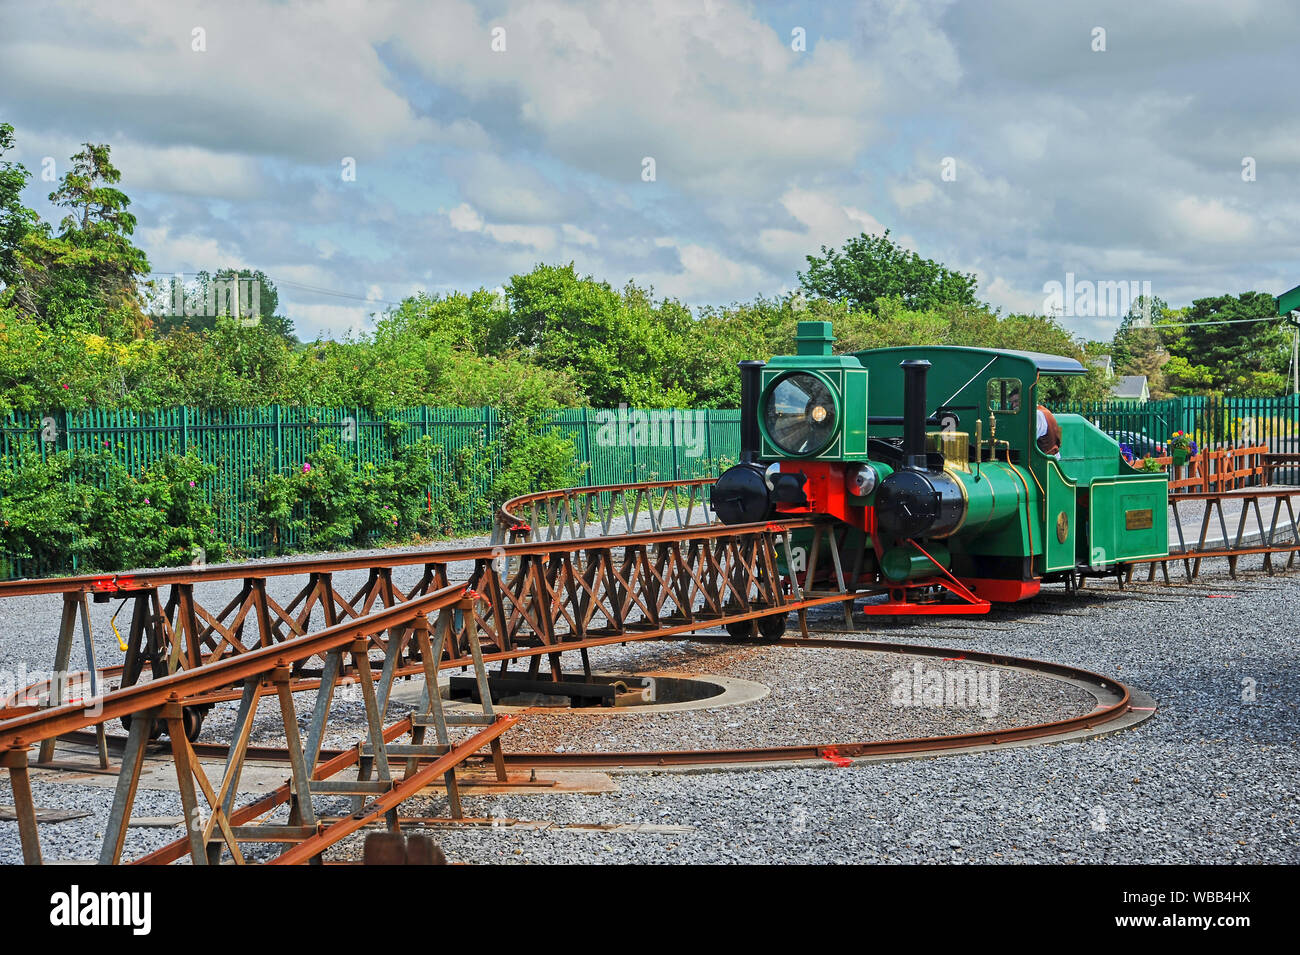 The Lartigue Monorail in Listowel, County Kerry, Republic of Ireland, is a unique railway system built by Frenchman Charles Lartigue. Stock Photo